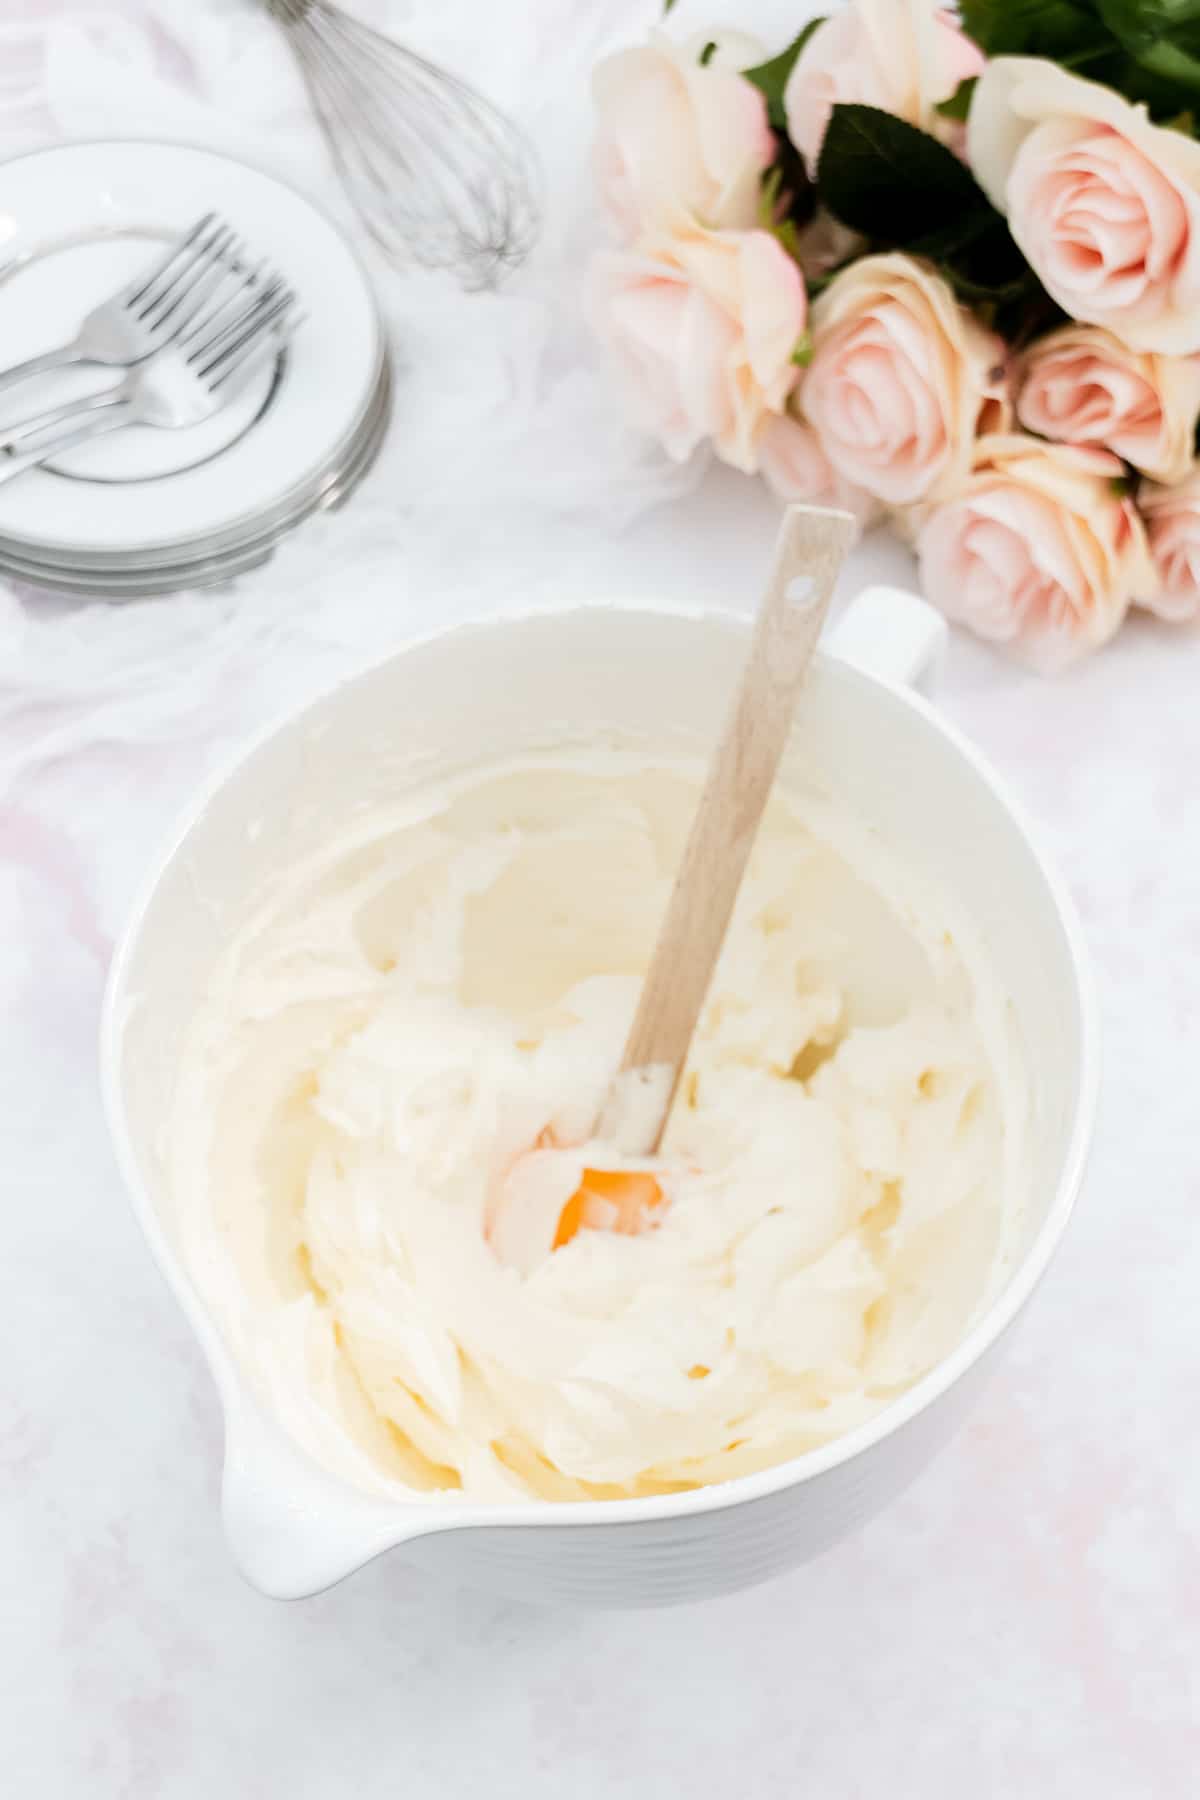 Vanilla frosting made in a large white mixing bowl.